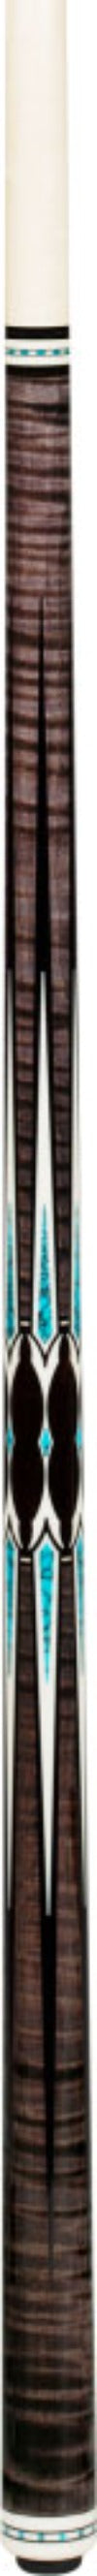 PL-21 Limited Edition Pool Cue -Pechauer